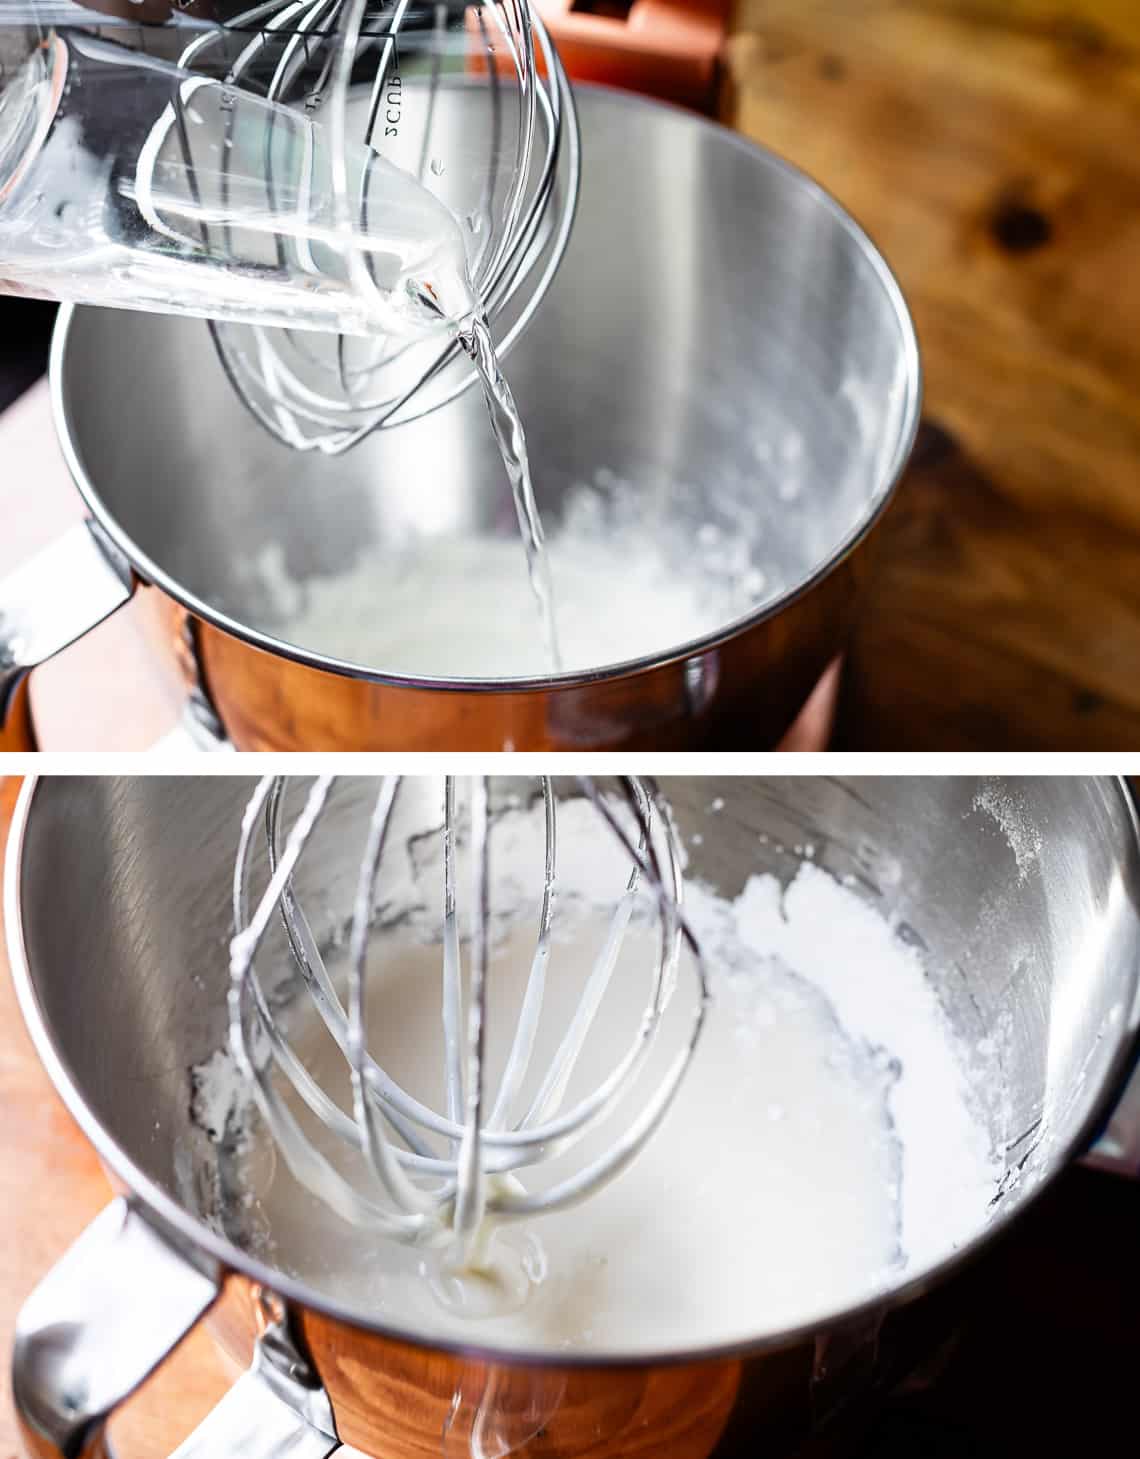 top adding water to the mixing bowl, bottom whisk dripping icing after mixing.